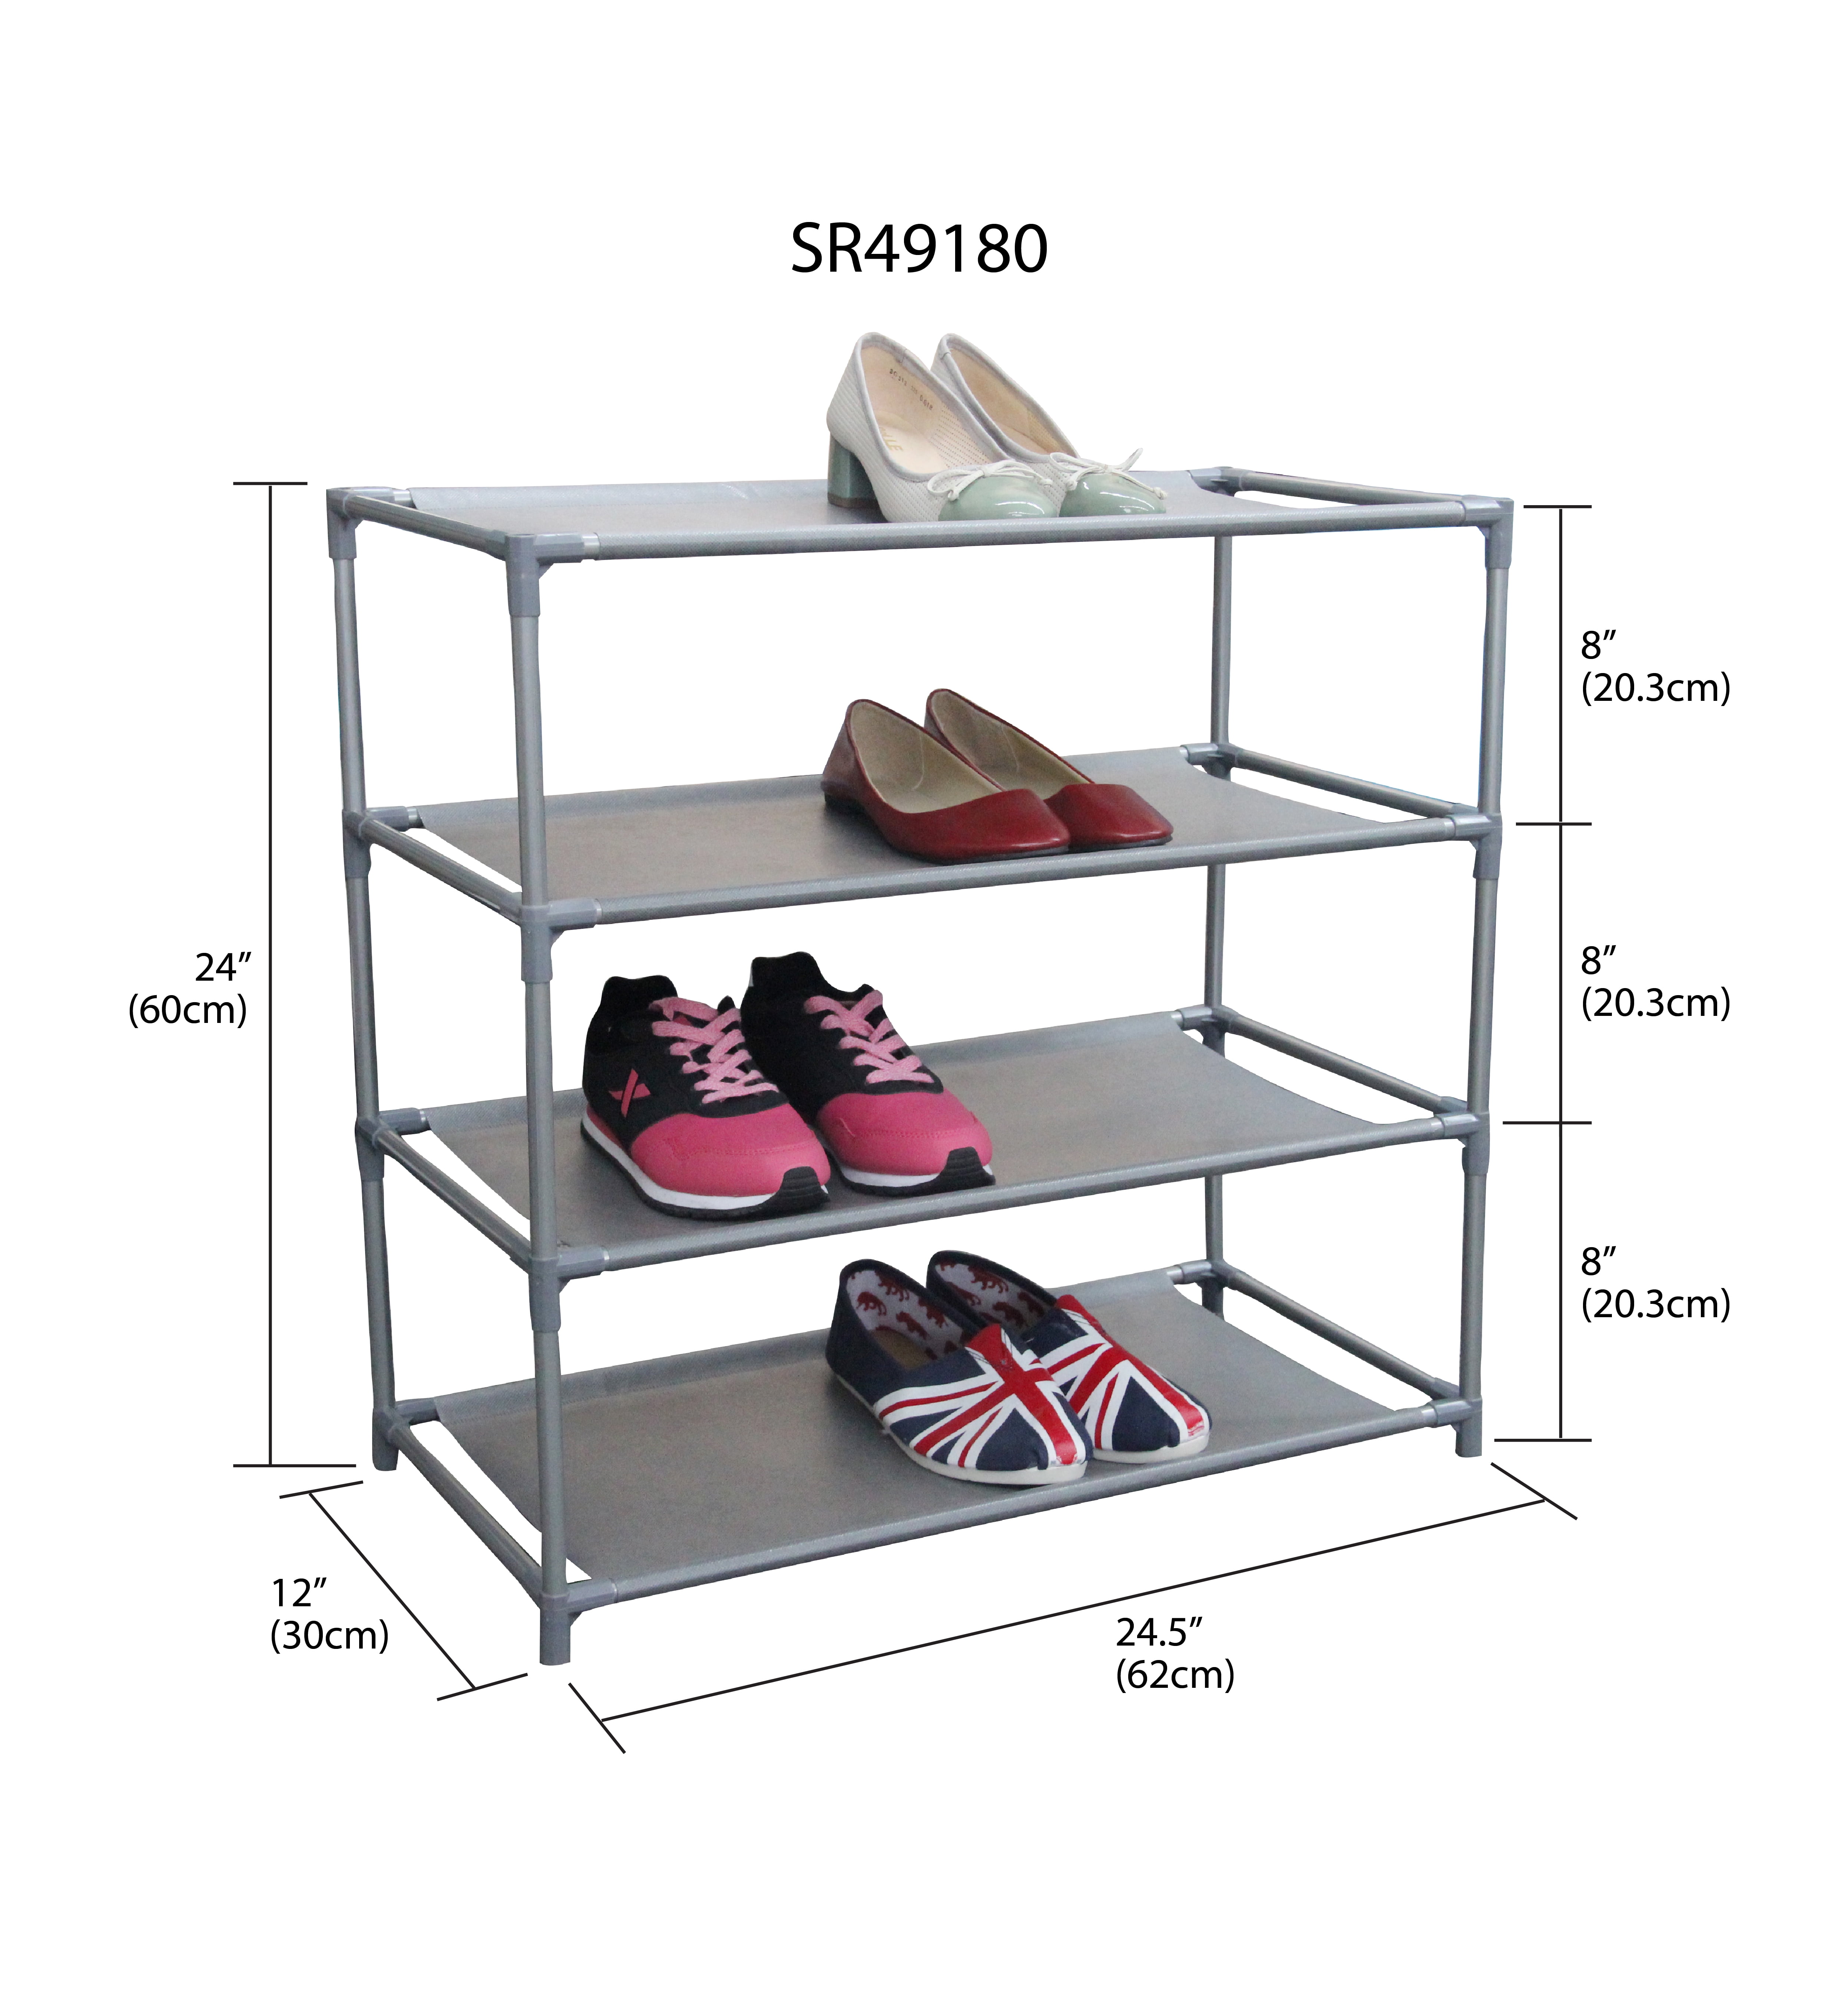  Foldable Shoe Rack, Plastic Shoe Rack Organizer, Can Hold 8-12  Pairs of Shoes, Free Standing Shoe Racks Stackable Shoes Rack Storage Shelf  (4-Tier) : Home & Kitchen